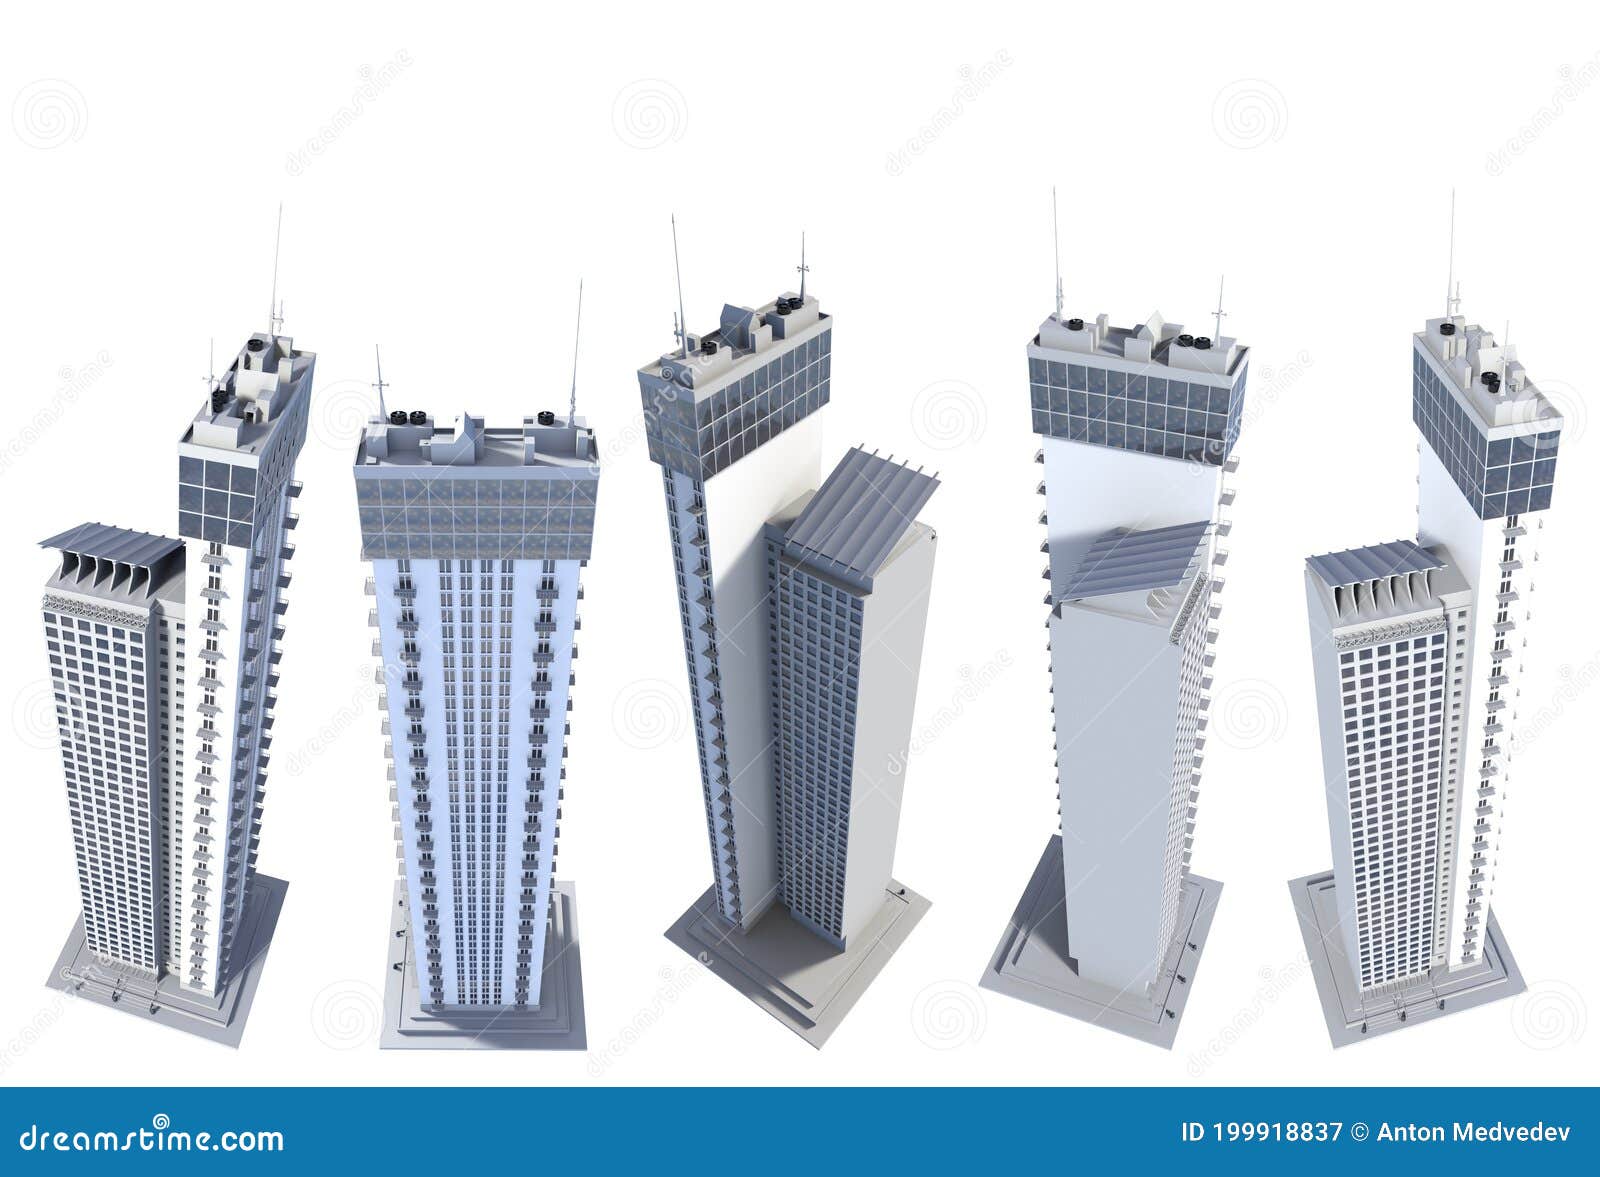 5 Top View Renders of Fictional Design Financial Tall Buildings Living